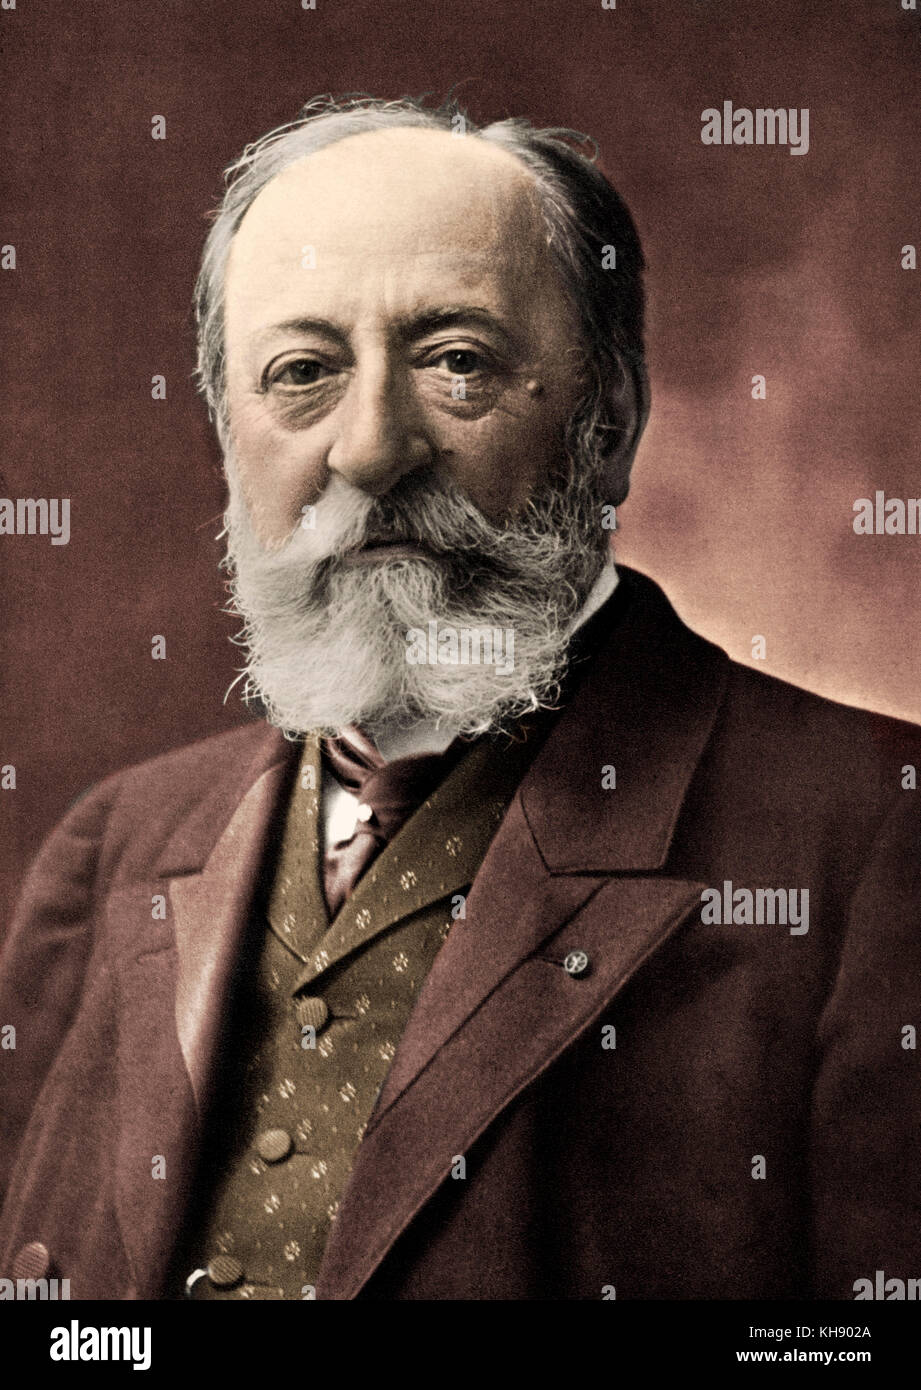 Camille Saint-Saens, Famous Composer Painting by Esoterica Art